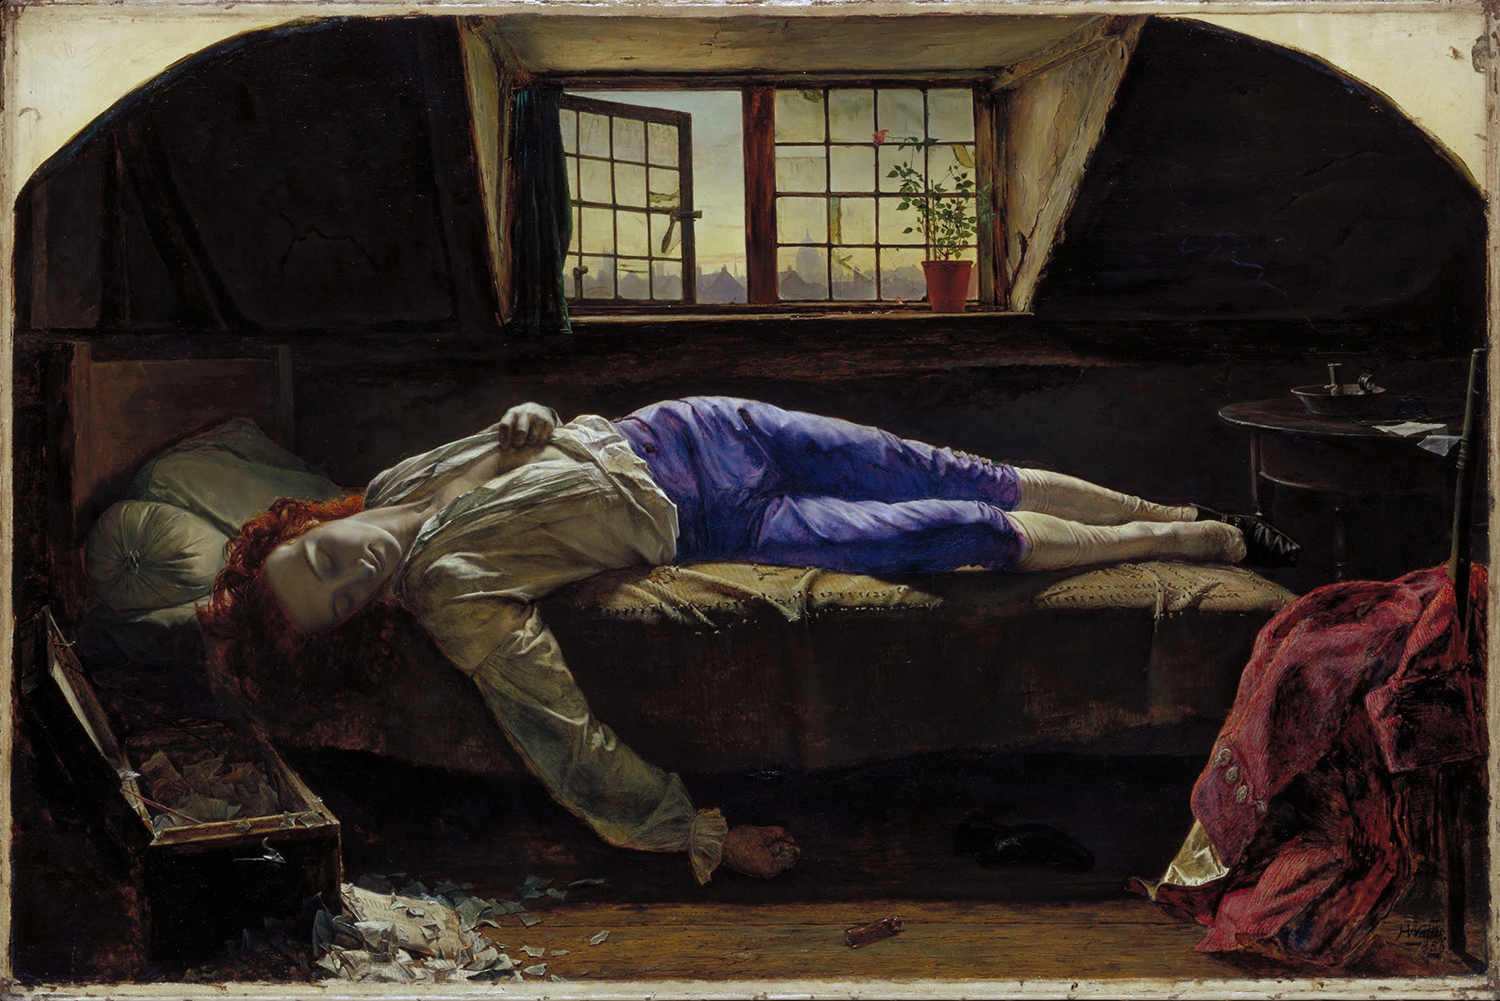 The Death of Chatterton by Henry Morris used a red haired male model, the novelist George Meredith